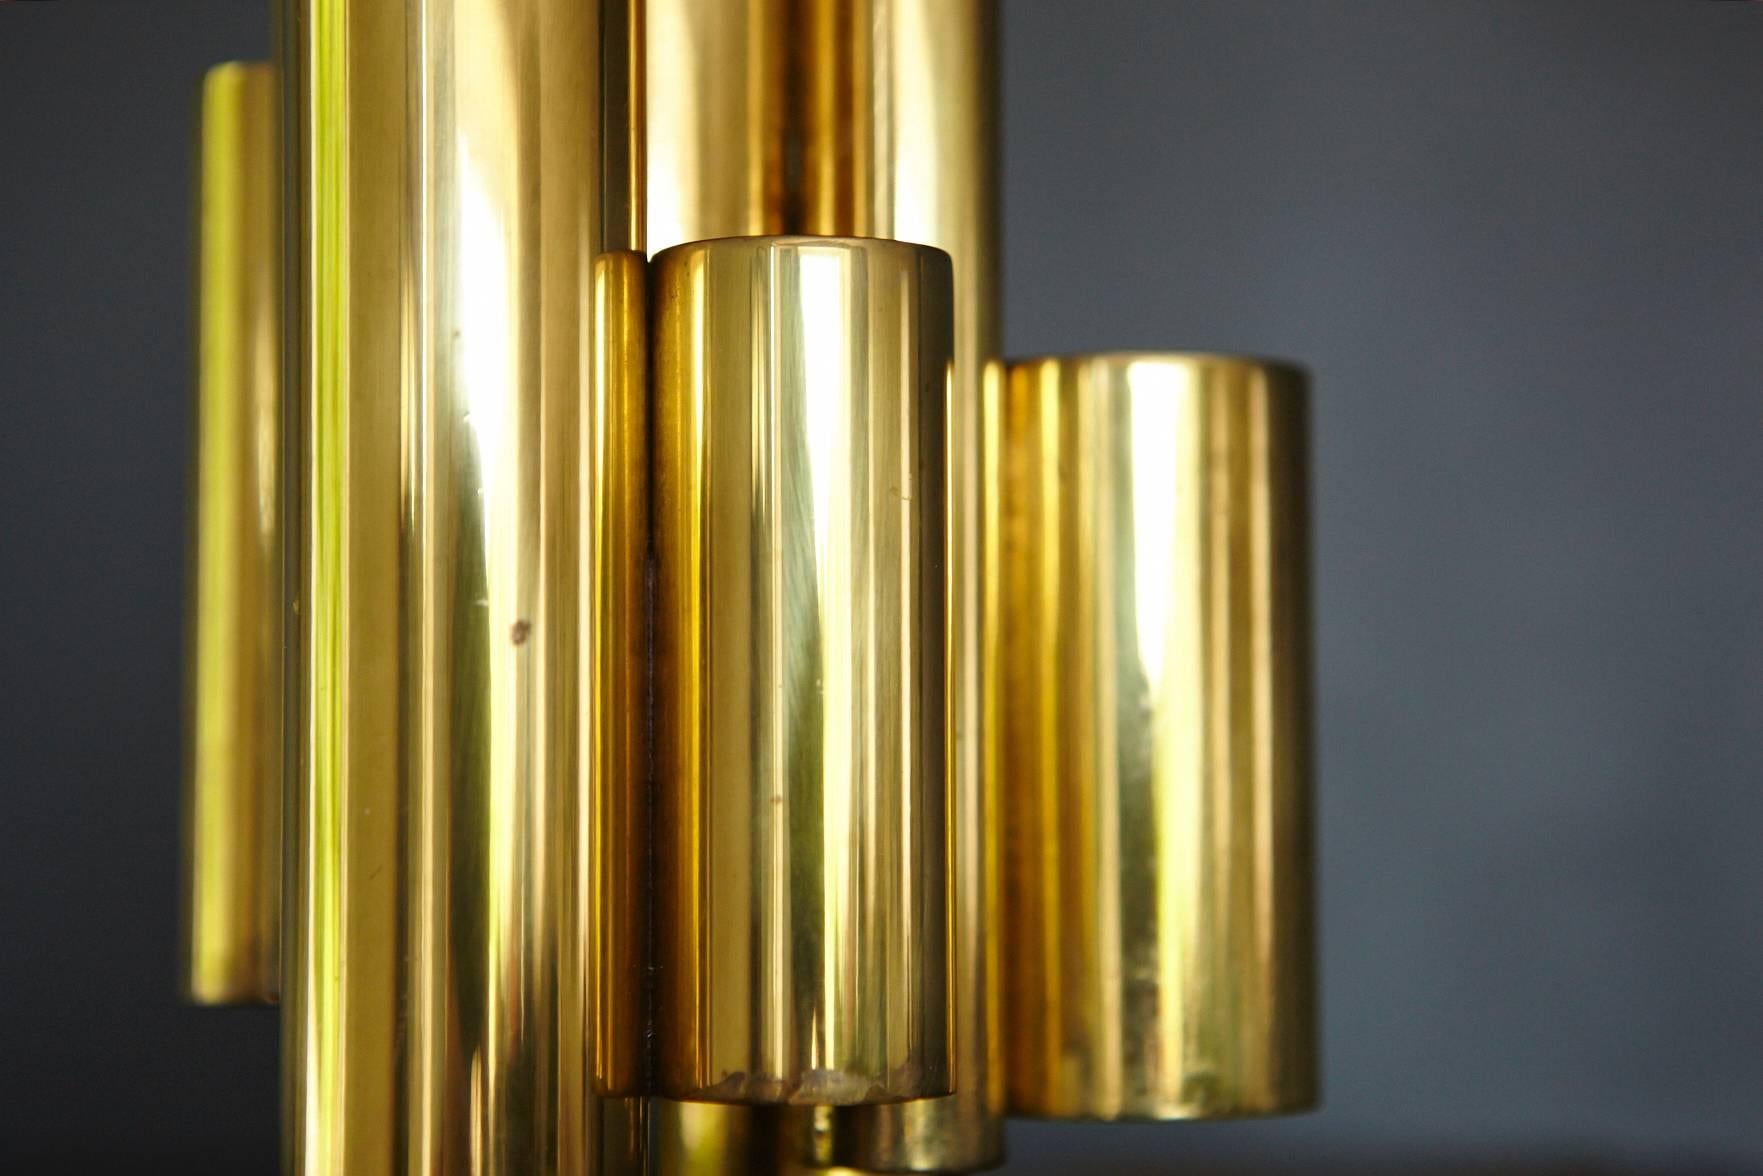 Italian Sculptural Tubular Brass Candleholder in the Style of Gio Ponti for 5 candles